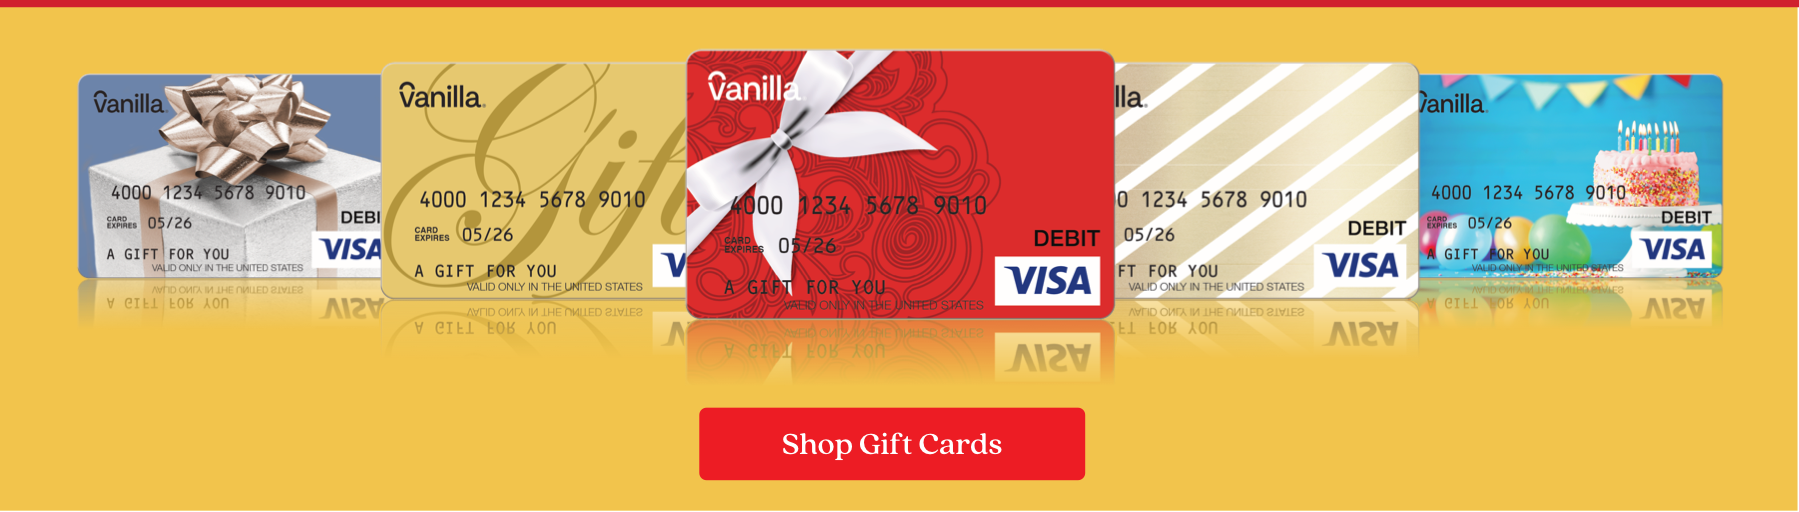 How much can you get on a visa gift card Vanilla Visa Landing Page